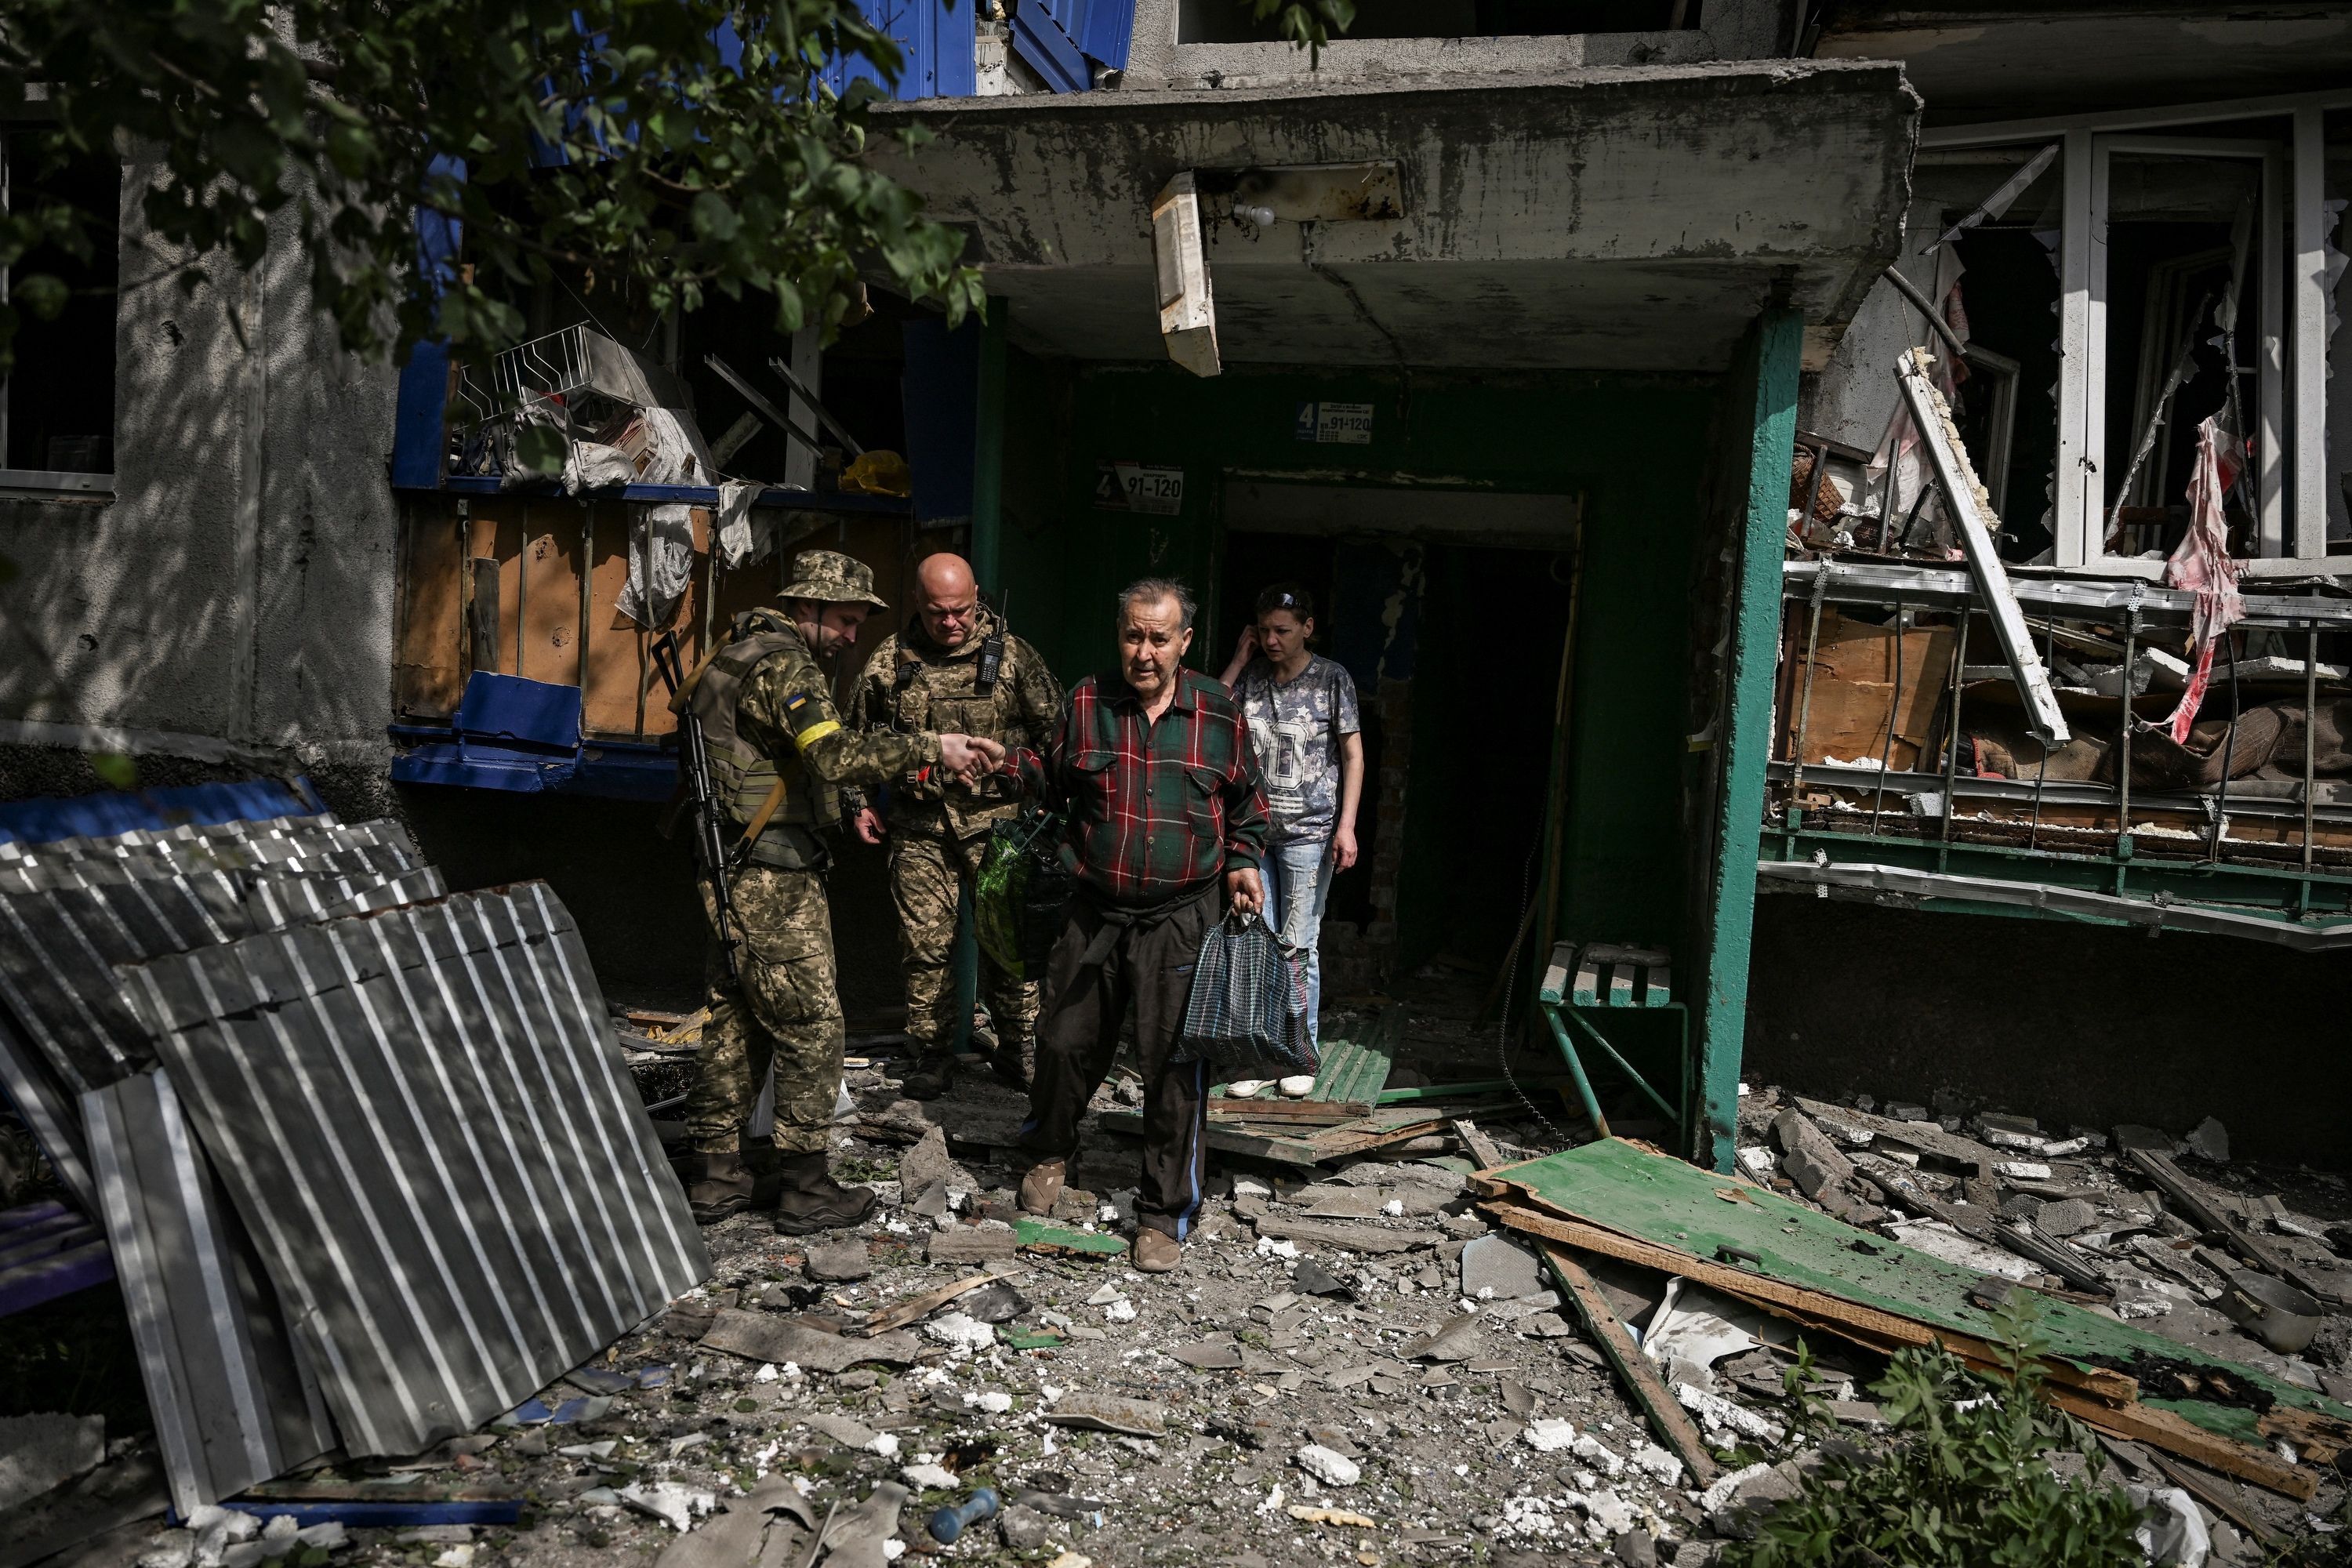 Despite the Ukrainian setbacks, the war seems likely to drag on for some time